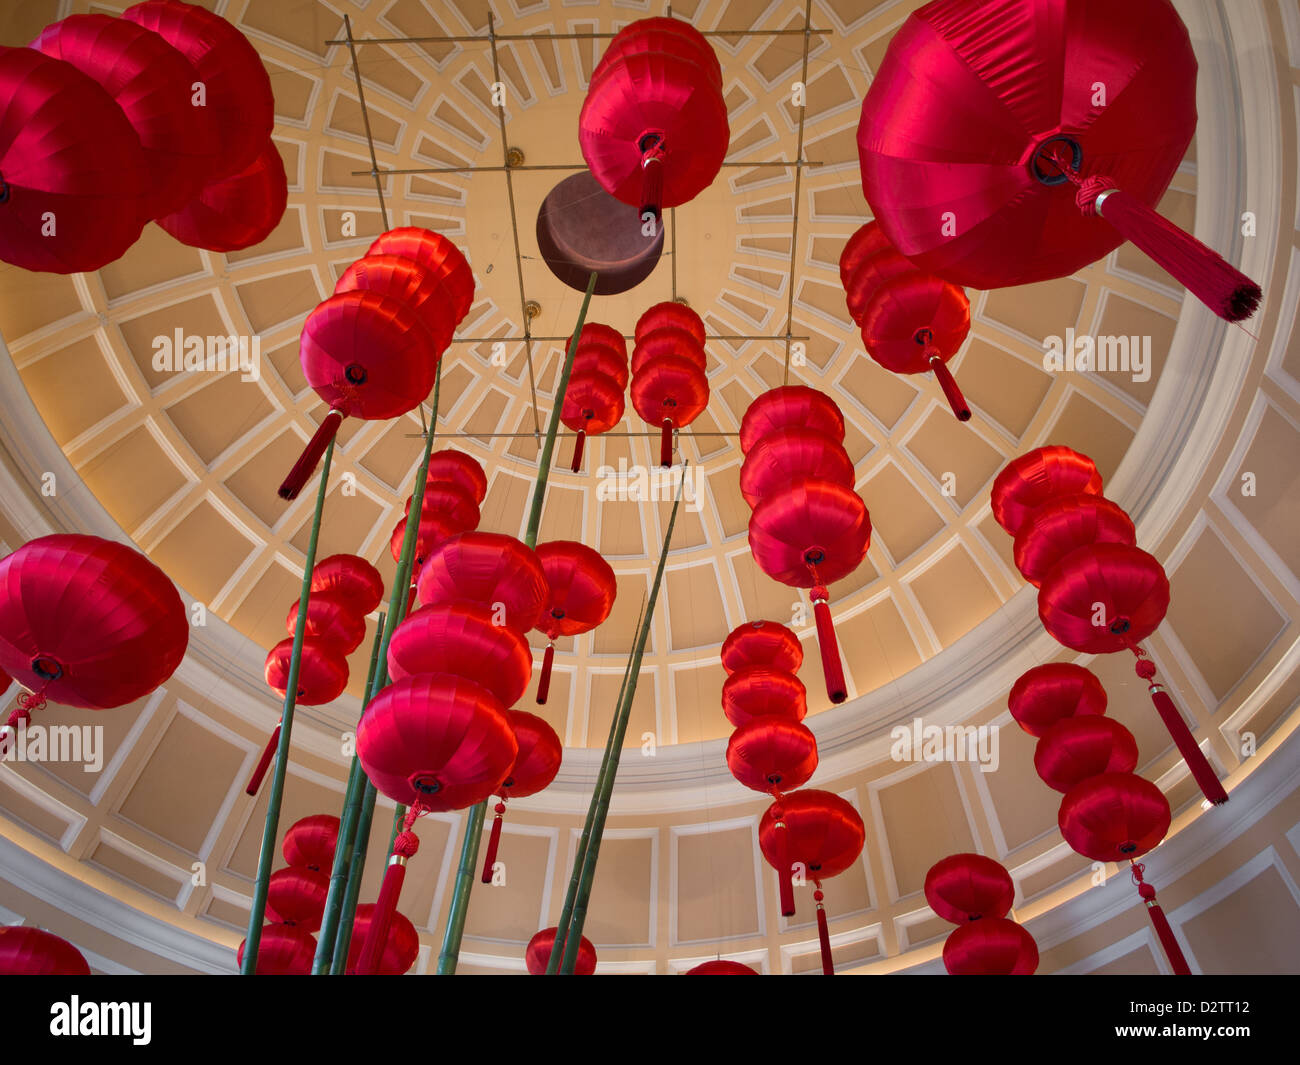 Red Chinese New Year lanterns hanging from a dome in the Bellagio Hotel in Las Vegas, Nevada Stock Photo